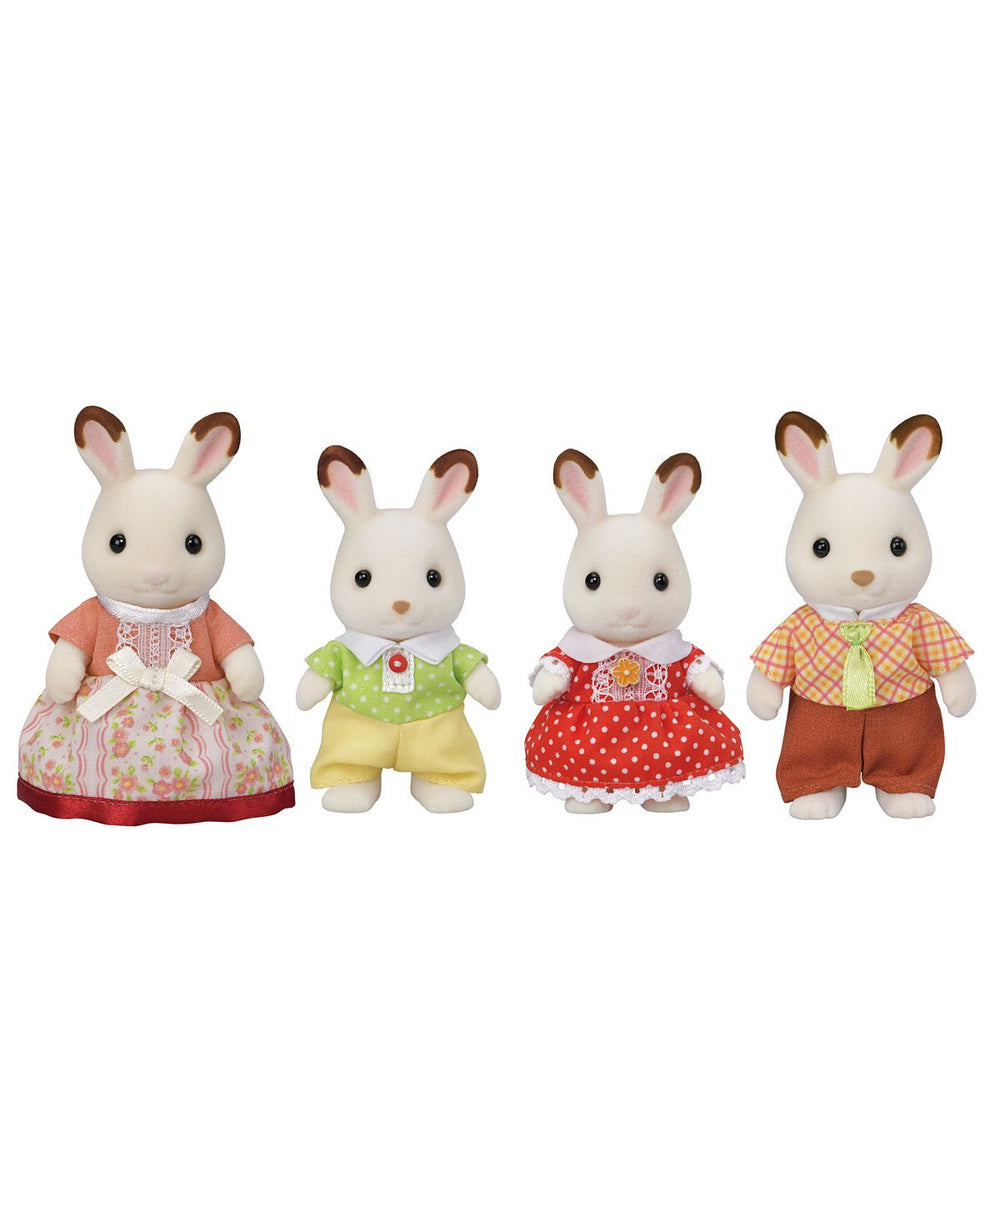 Calico Critters - Chocolate Rabbit Family, 4-Piece Collectible Doll Set